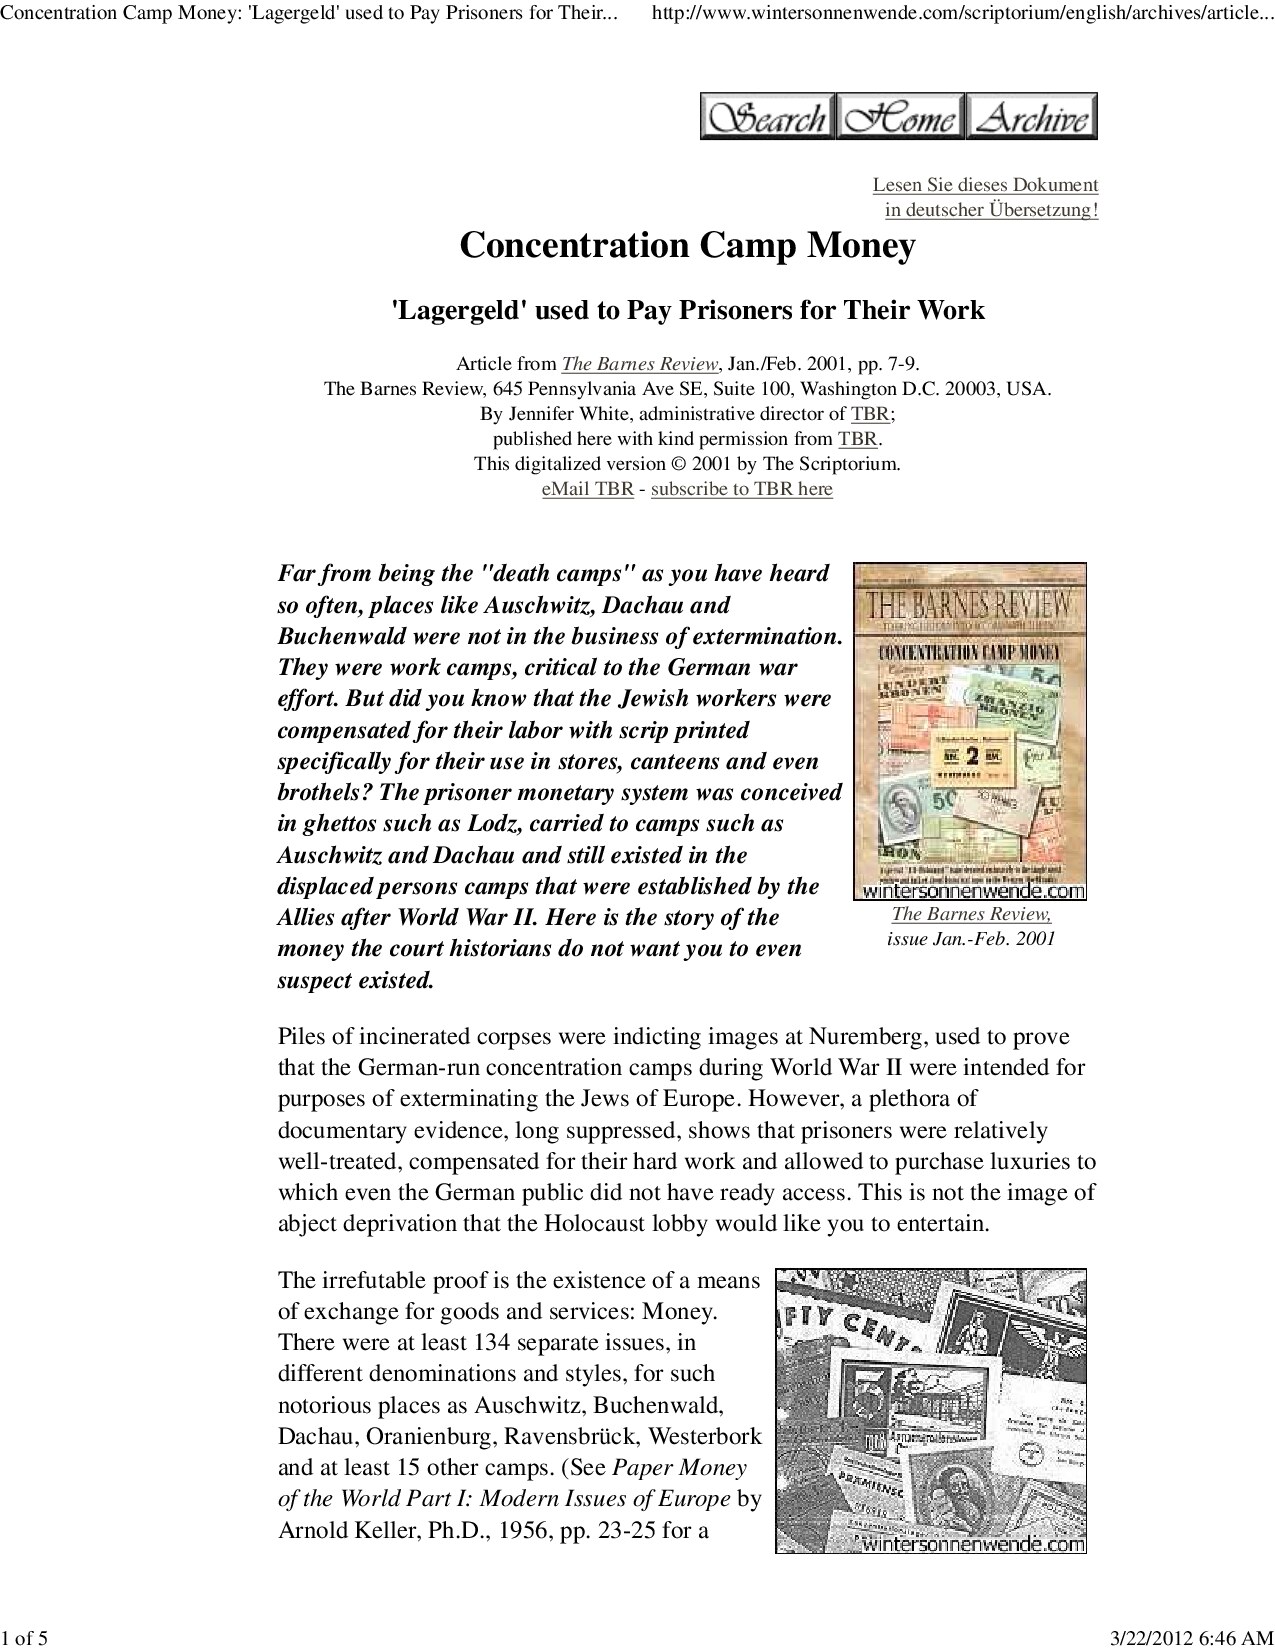 Concentration Camp Money: 'Lagergeld' used to Pay Prisoners for Their Work. Jennifer White.